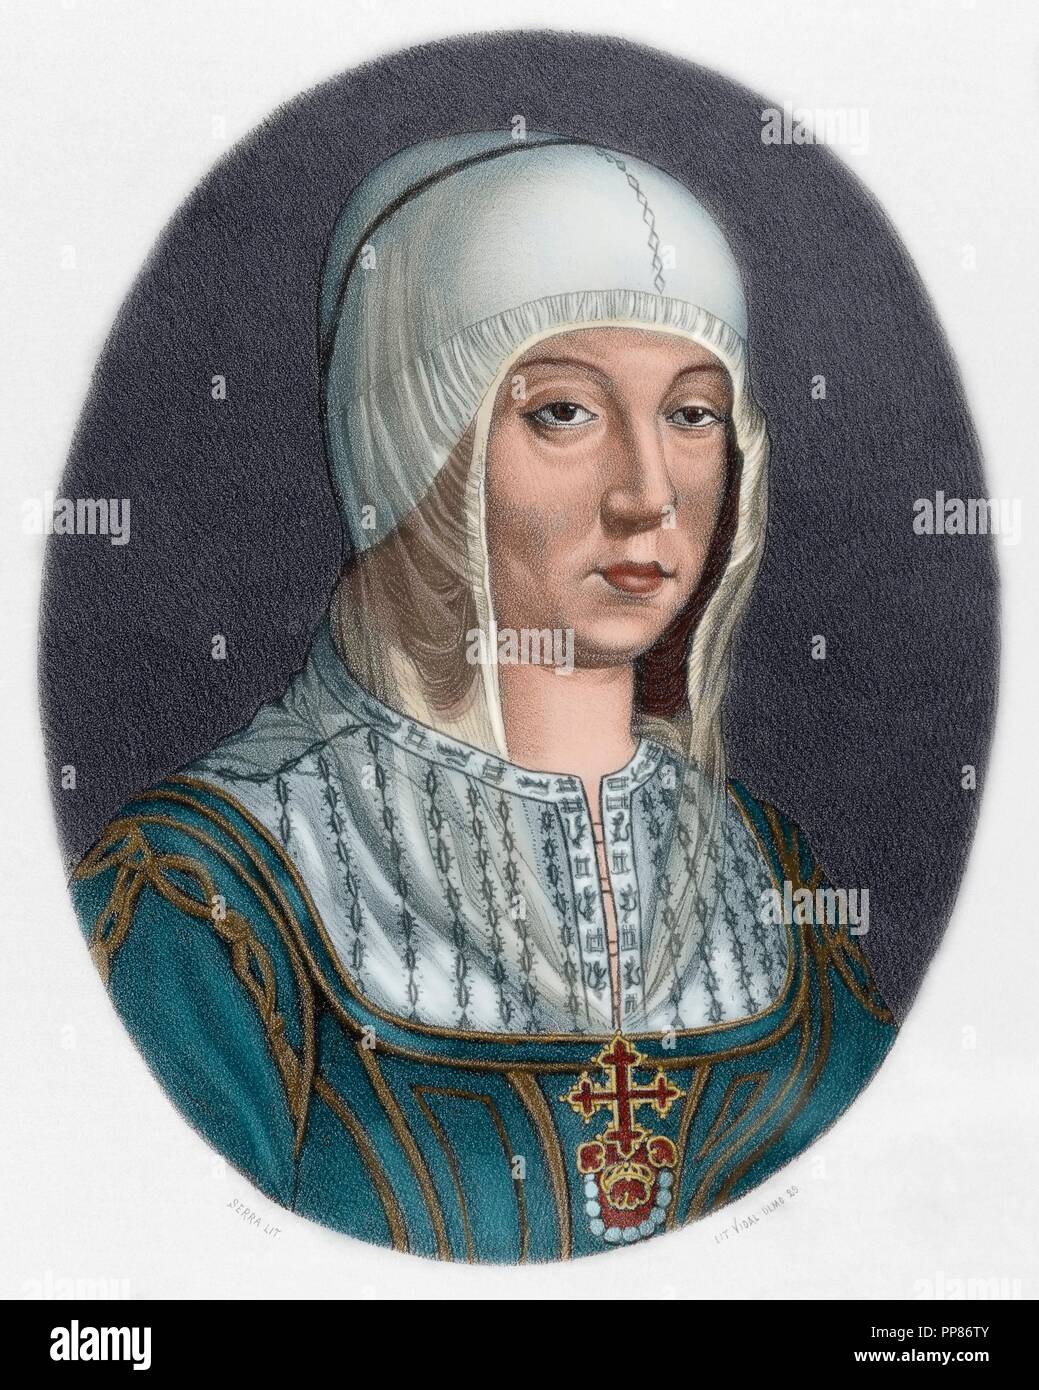 Isabella I of Castile (1451-1504). Queen of Castile. Engraving in Spain Illustrated History, 19th century. Colored. Stock Photo